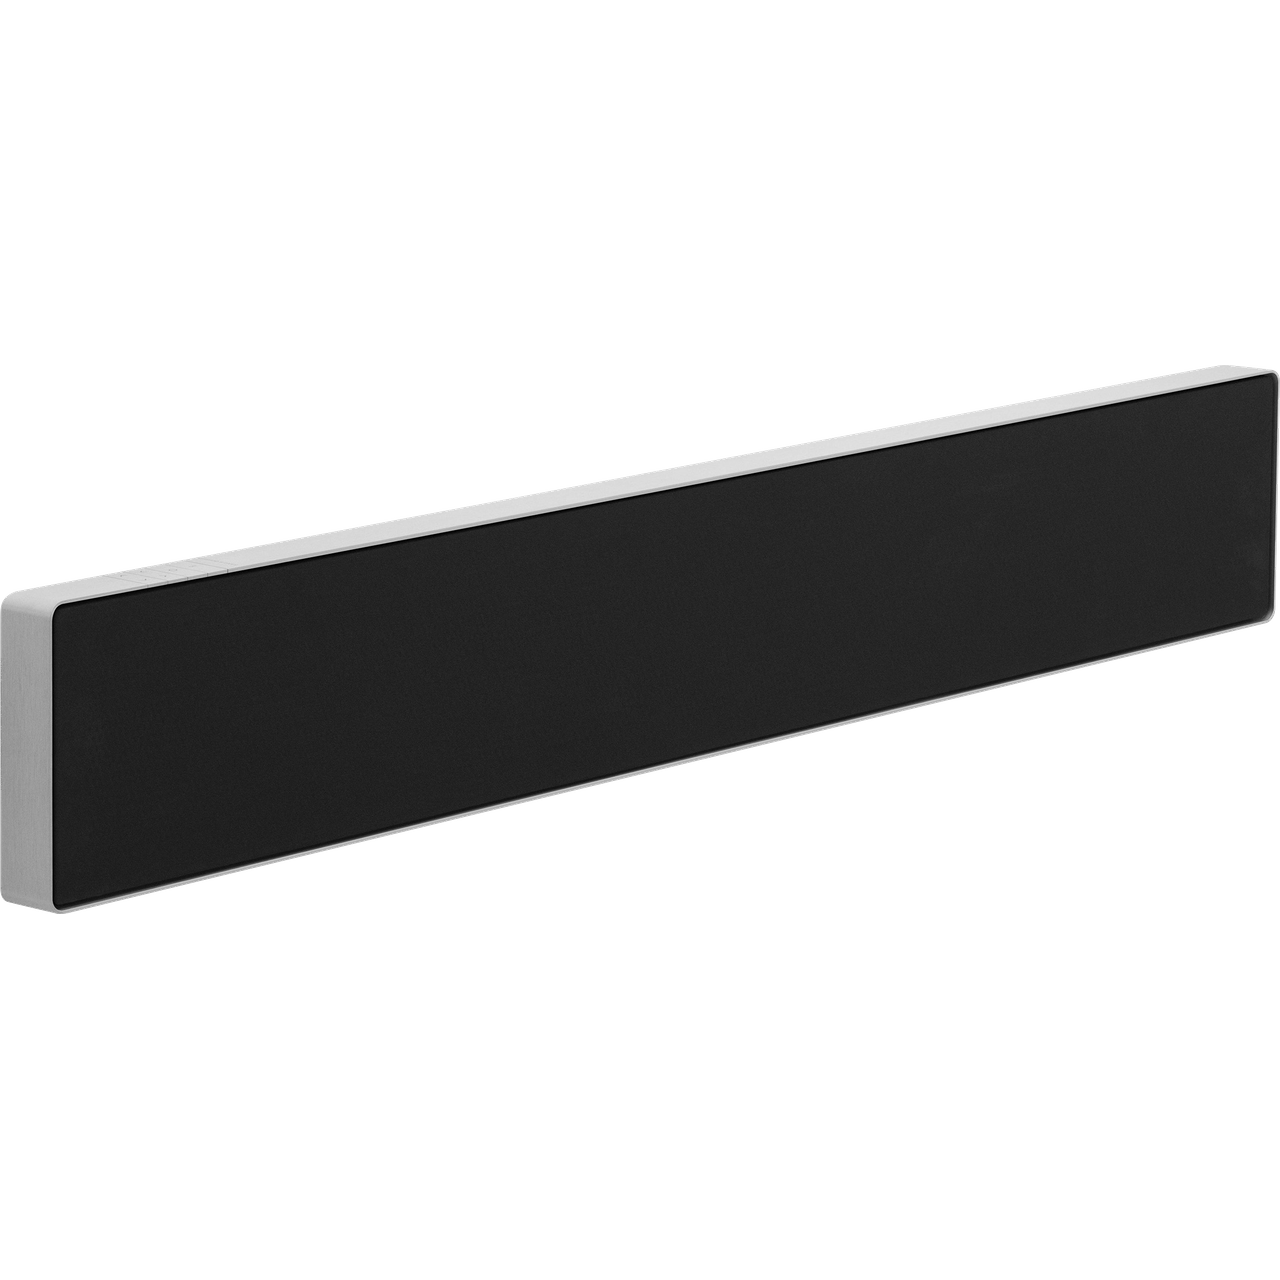 Bang & Olufsen Beosound Stage All-in-One Soundbar with Built-In Subwoofer and Dolby Atmos Review